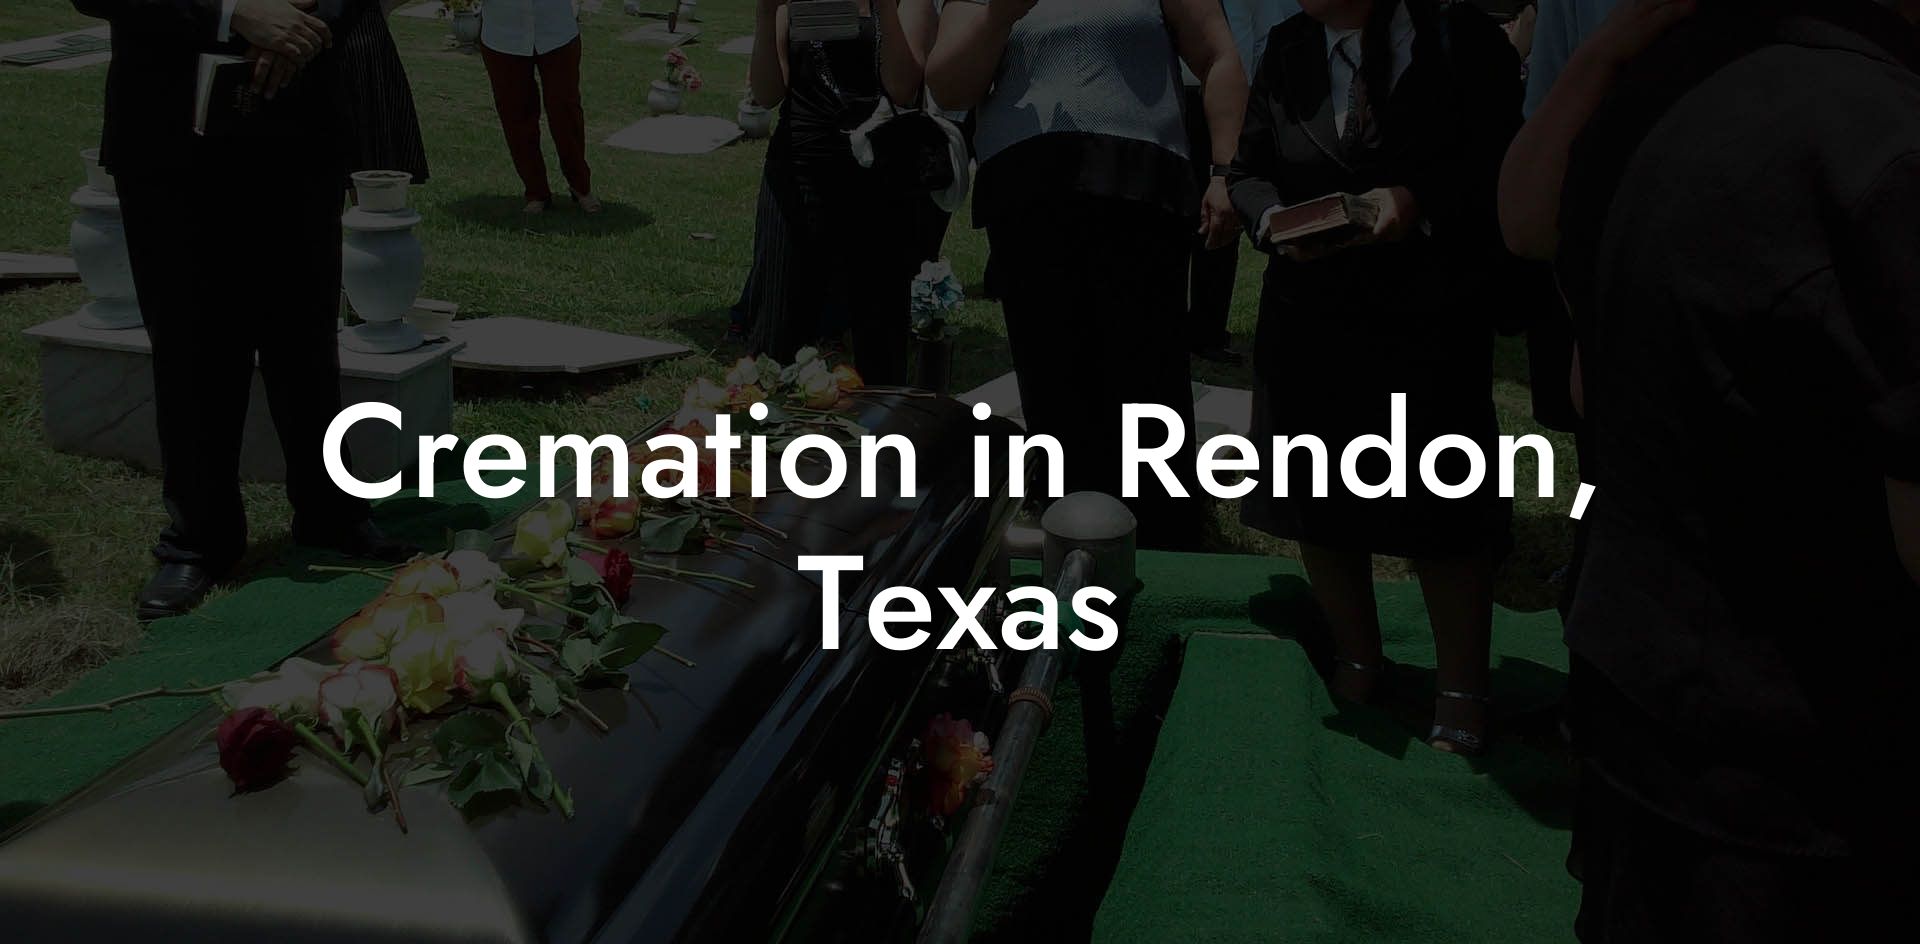 Cremation in Rendon, Texas